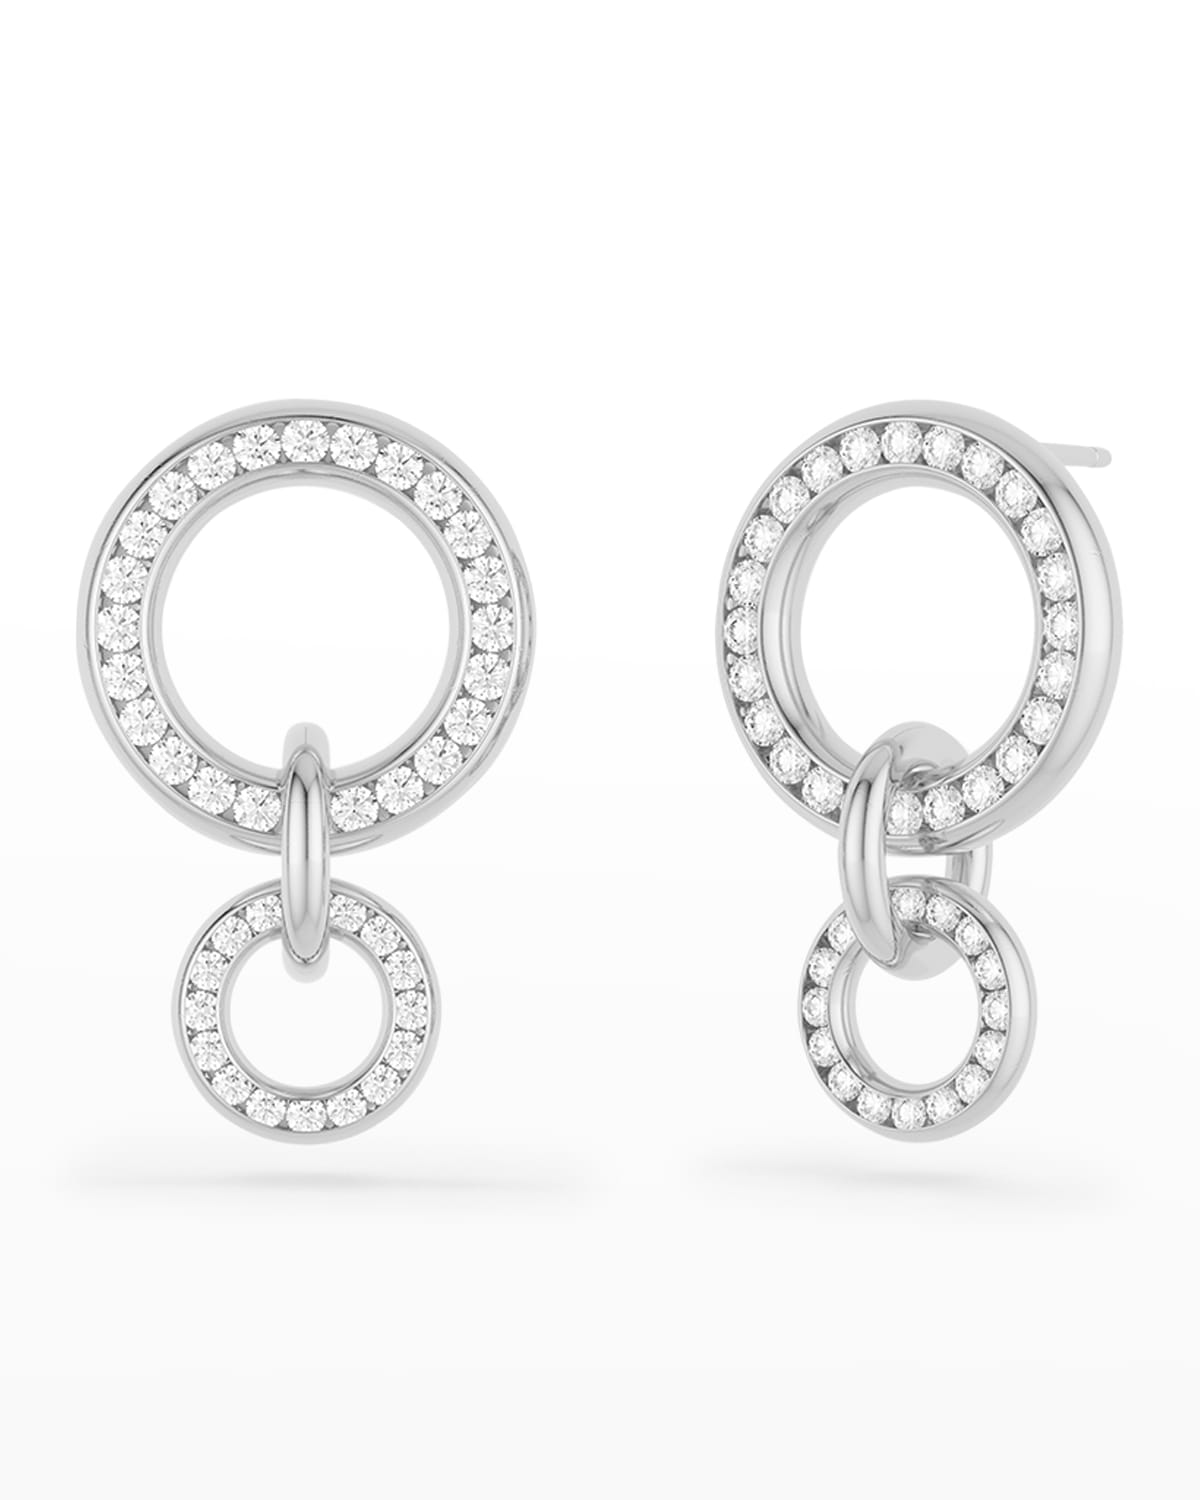 SPINELLI KILCOLLIN WHITE GOLD 3-LINK EARRINGS WITH WHITE DIAMONDS